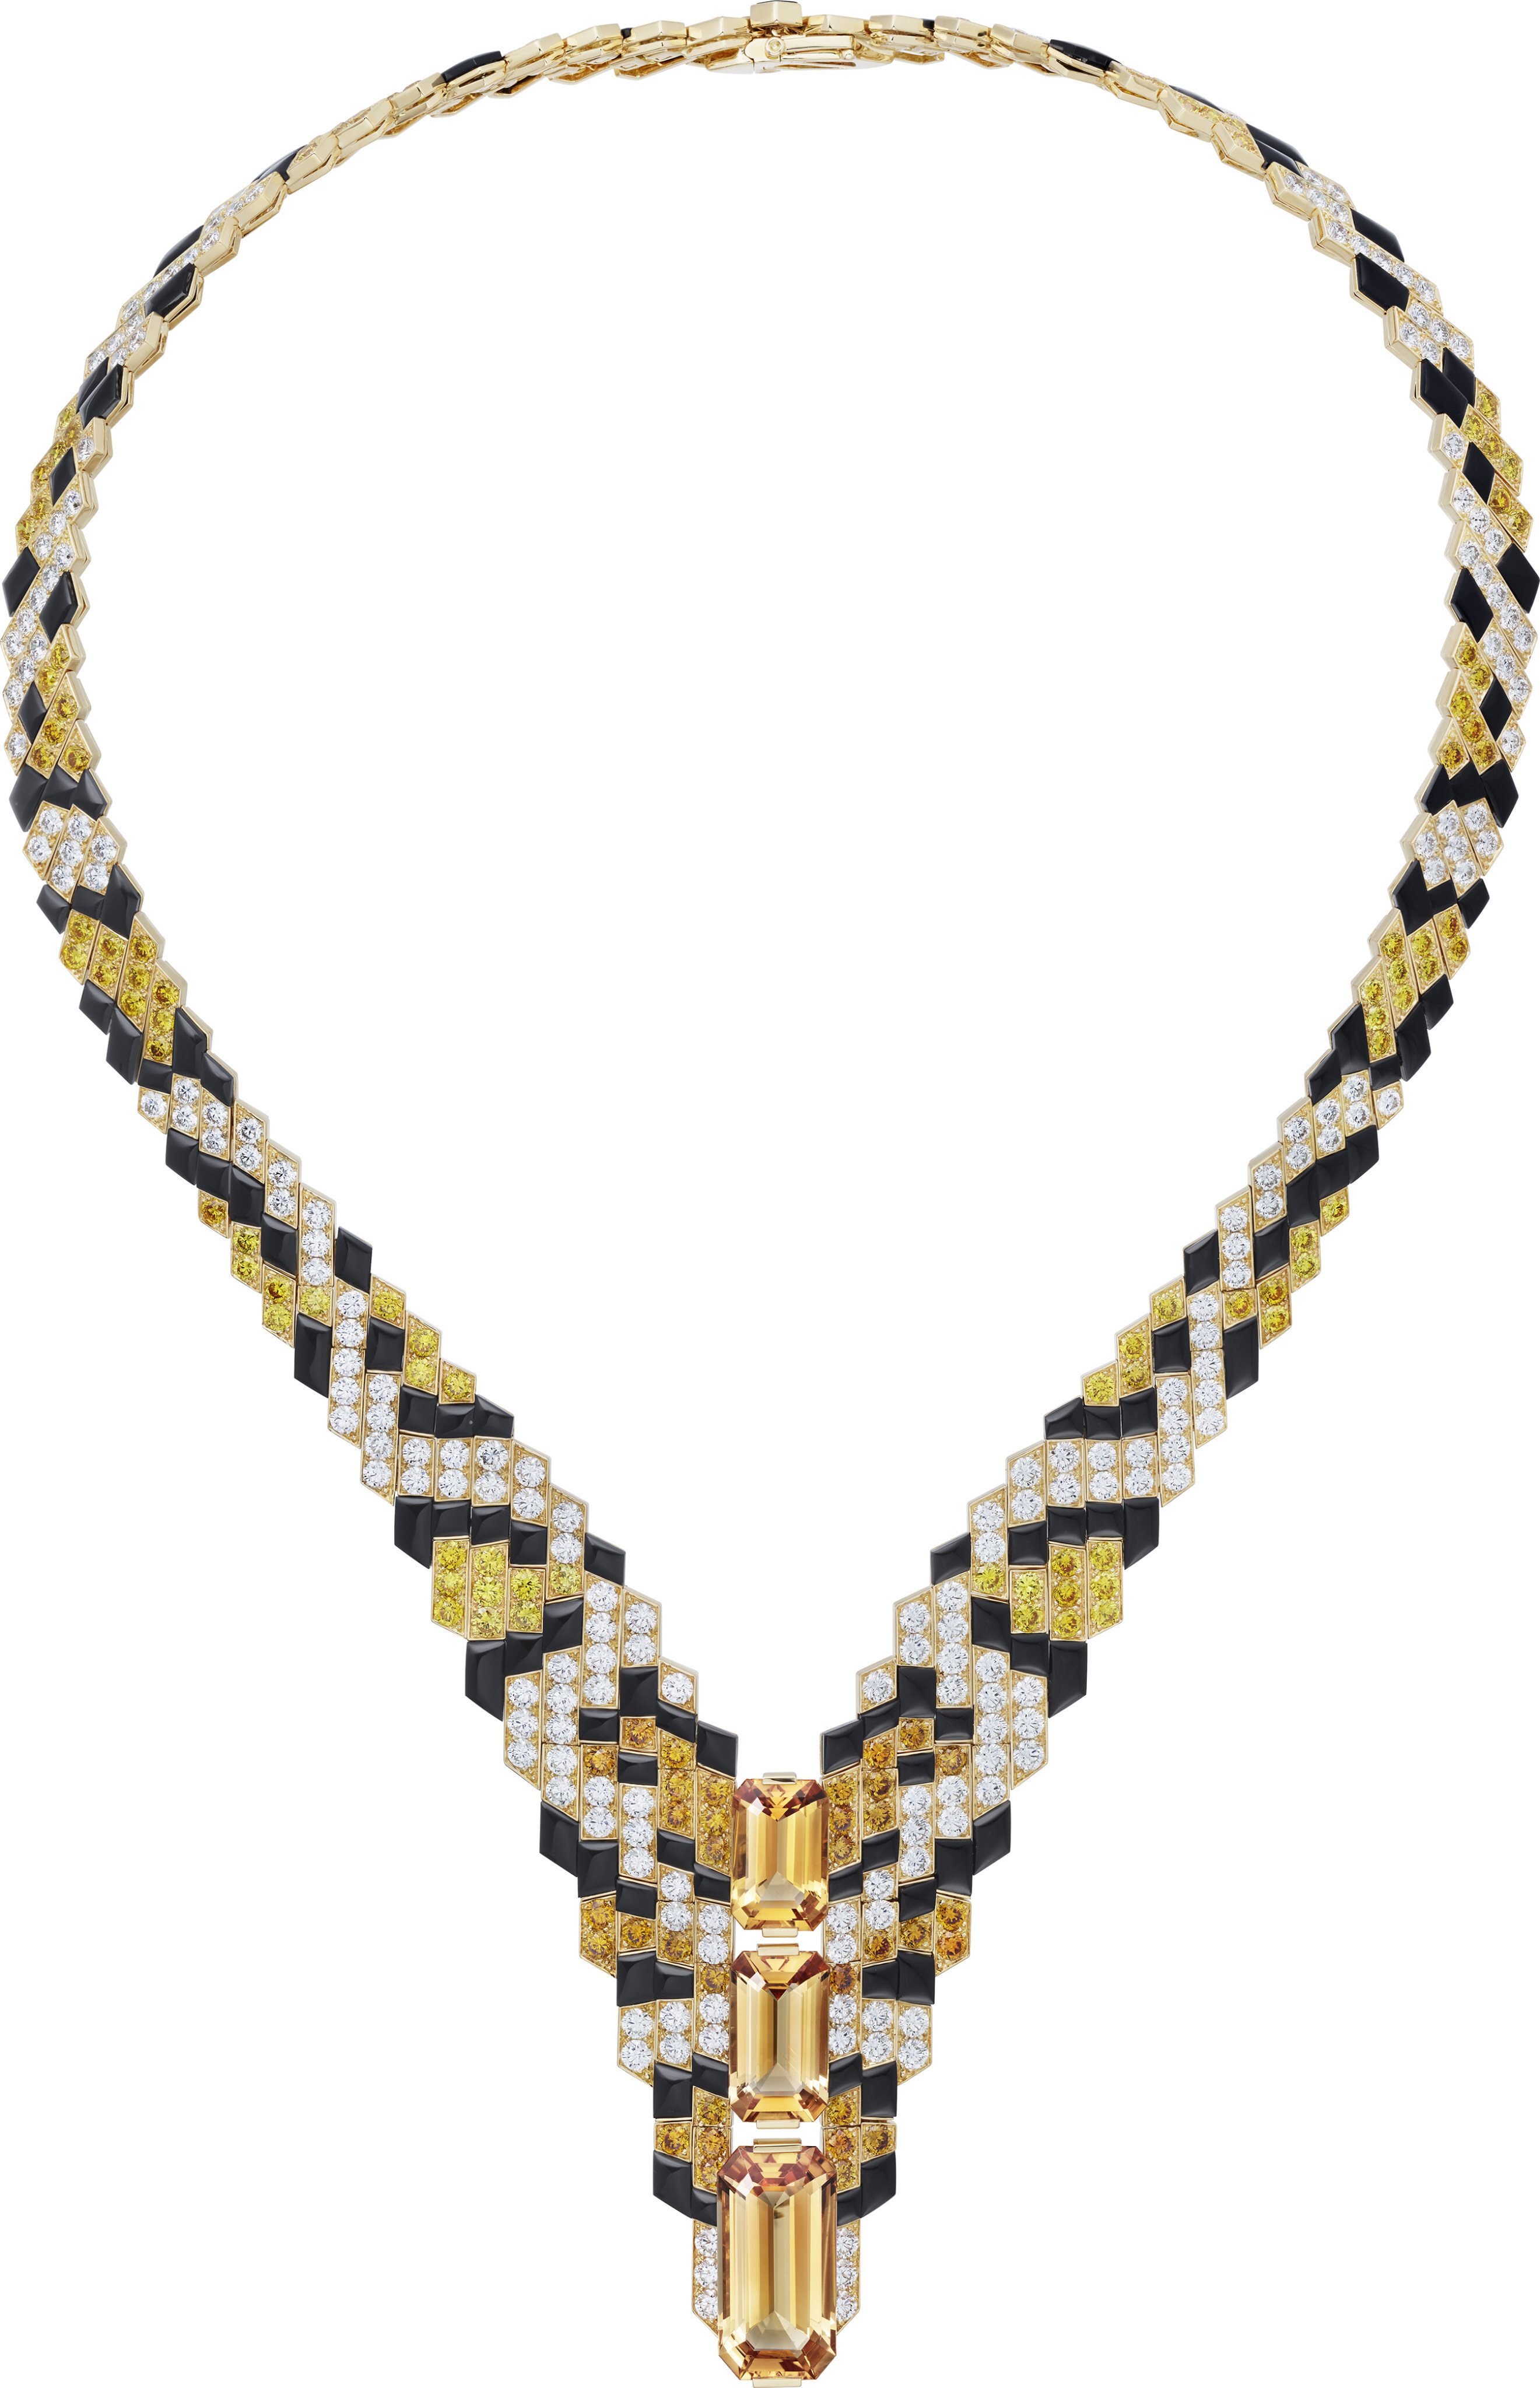 The Pixelage necklace features 27.34 carats of topazes with polished onyx and white, yellow and orange diamonds.